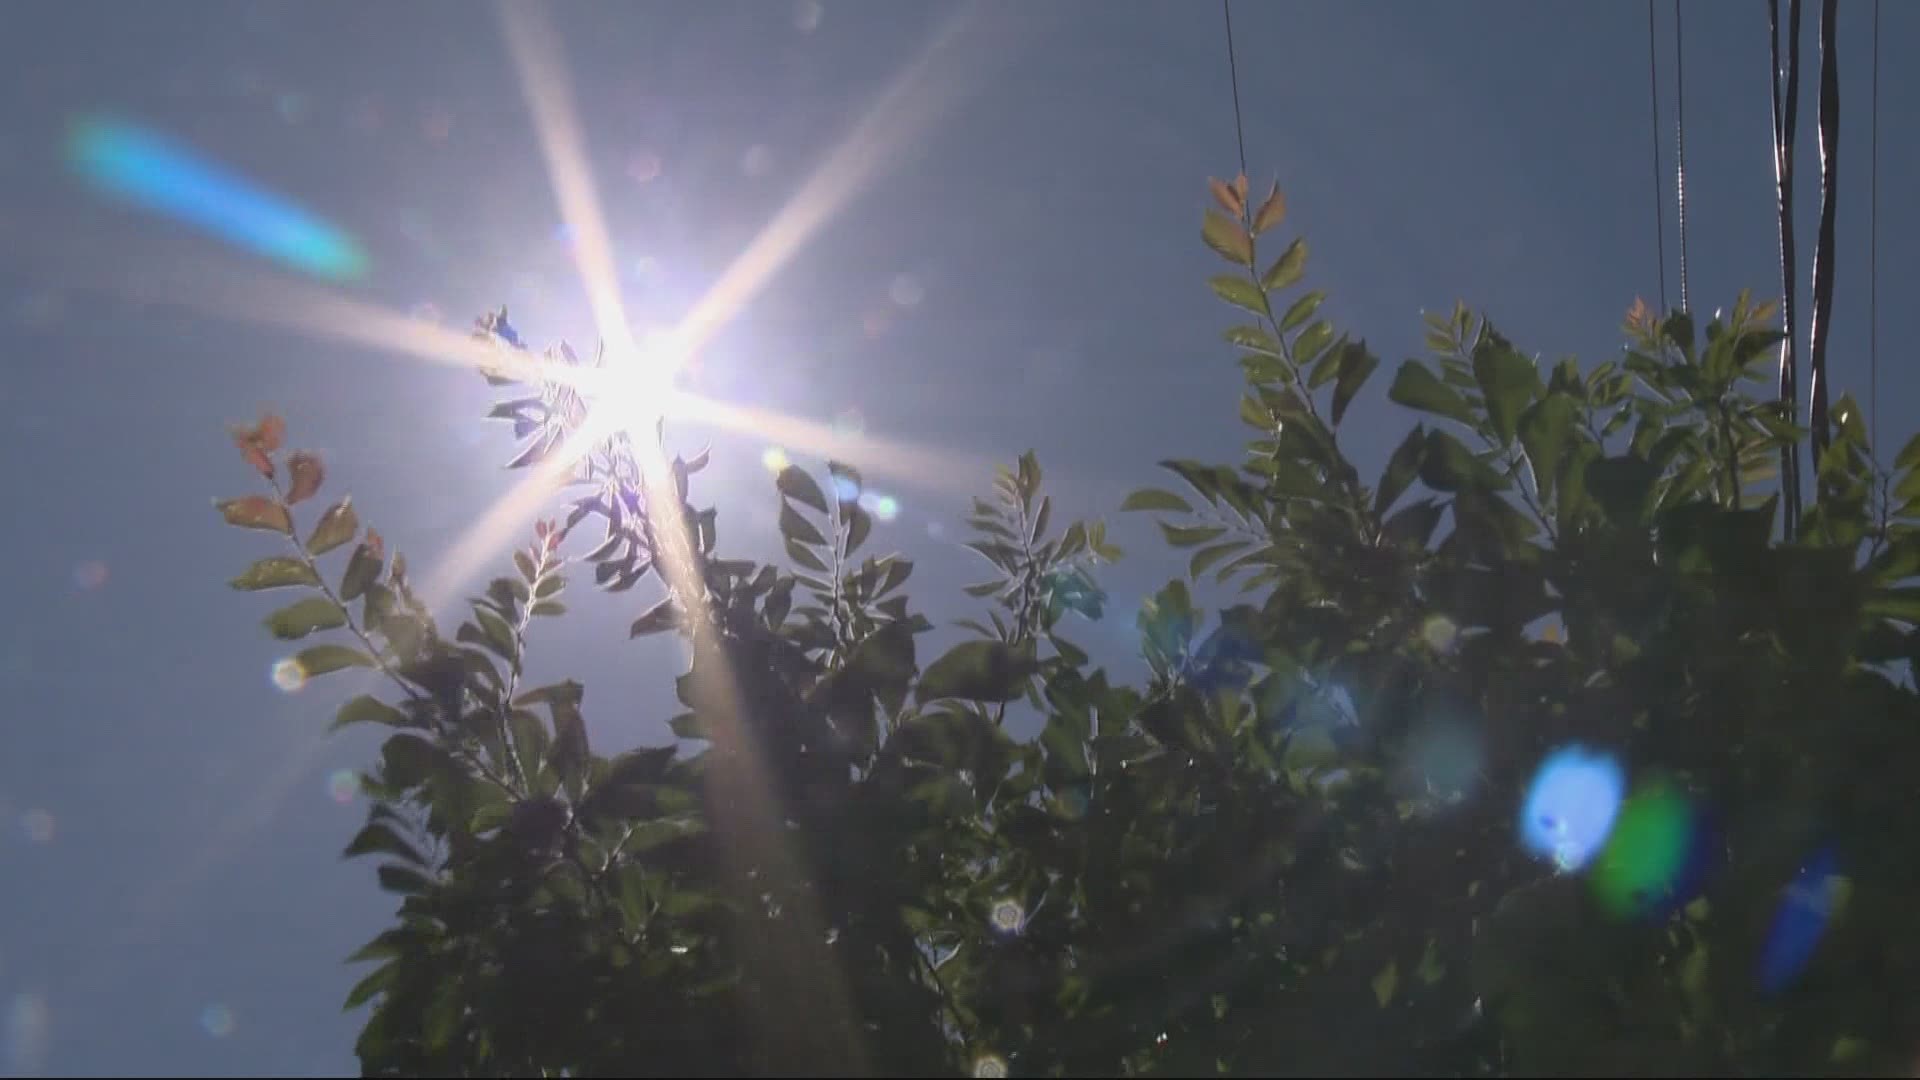 With another heat wave expected to hit Oregon in the coming days, state leaders are pleading with the public to be careful.